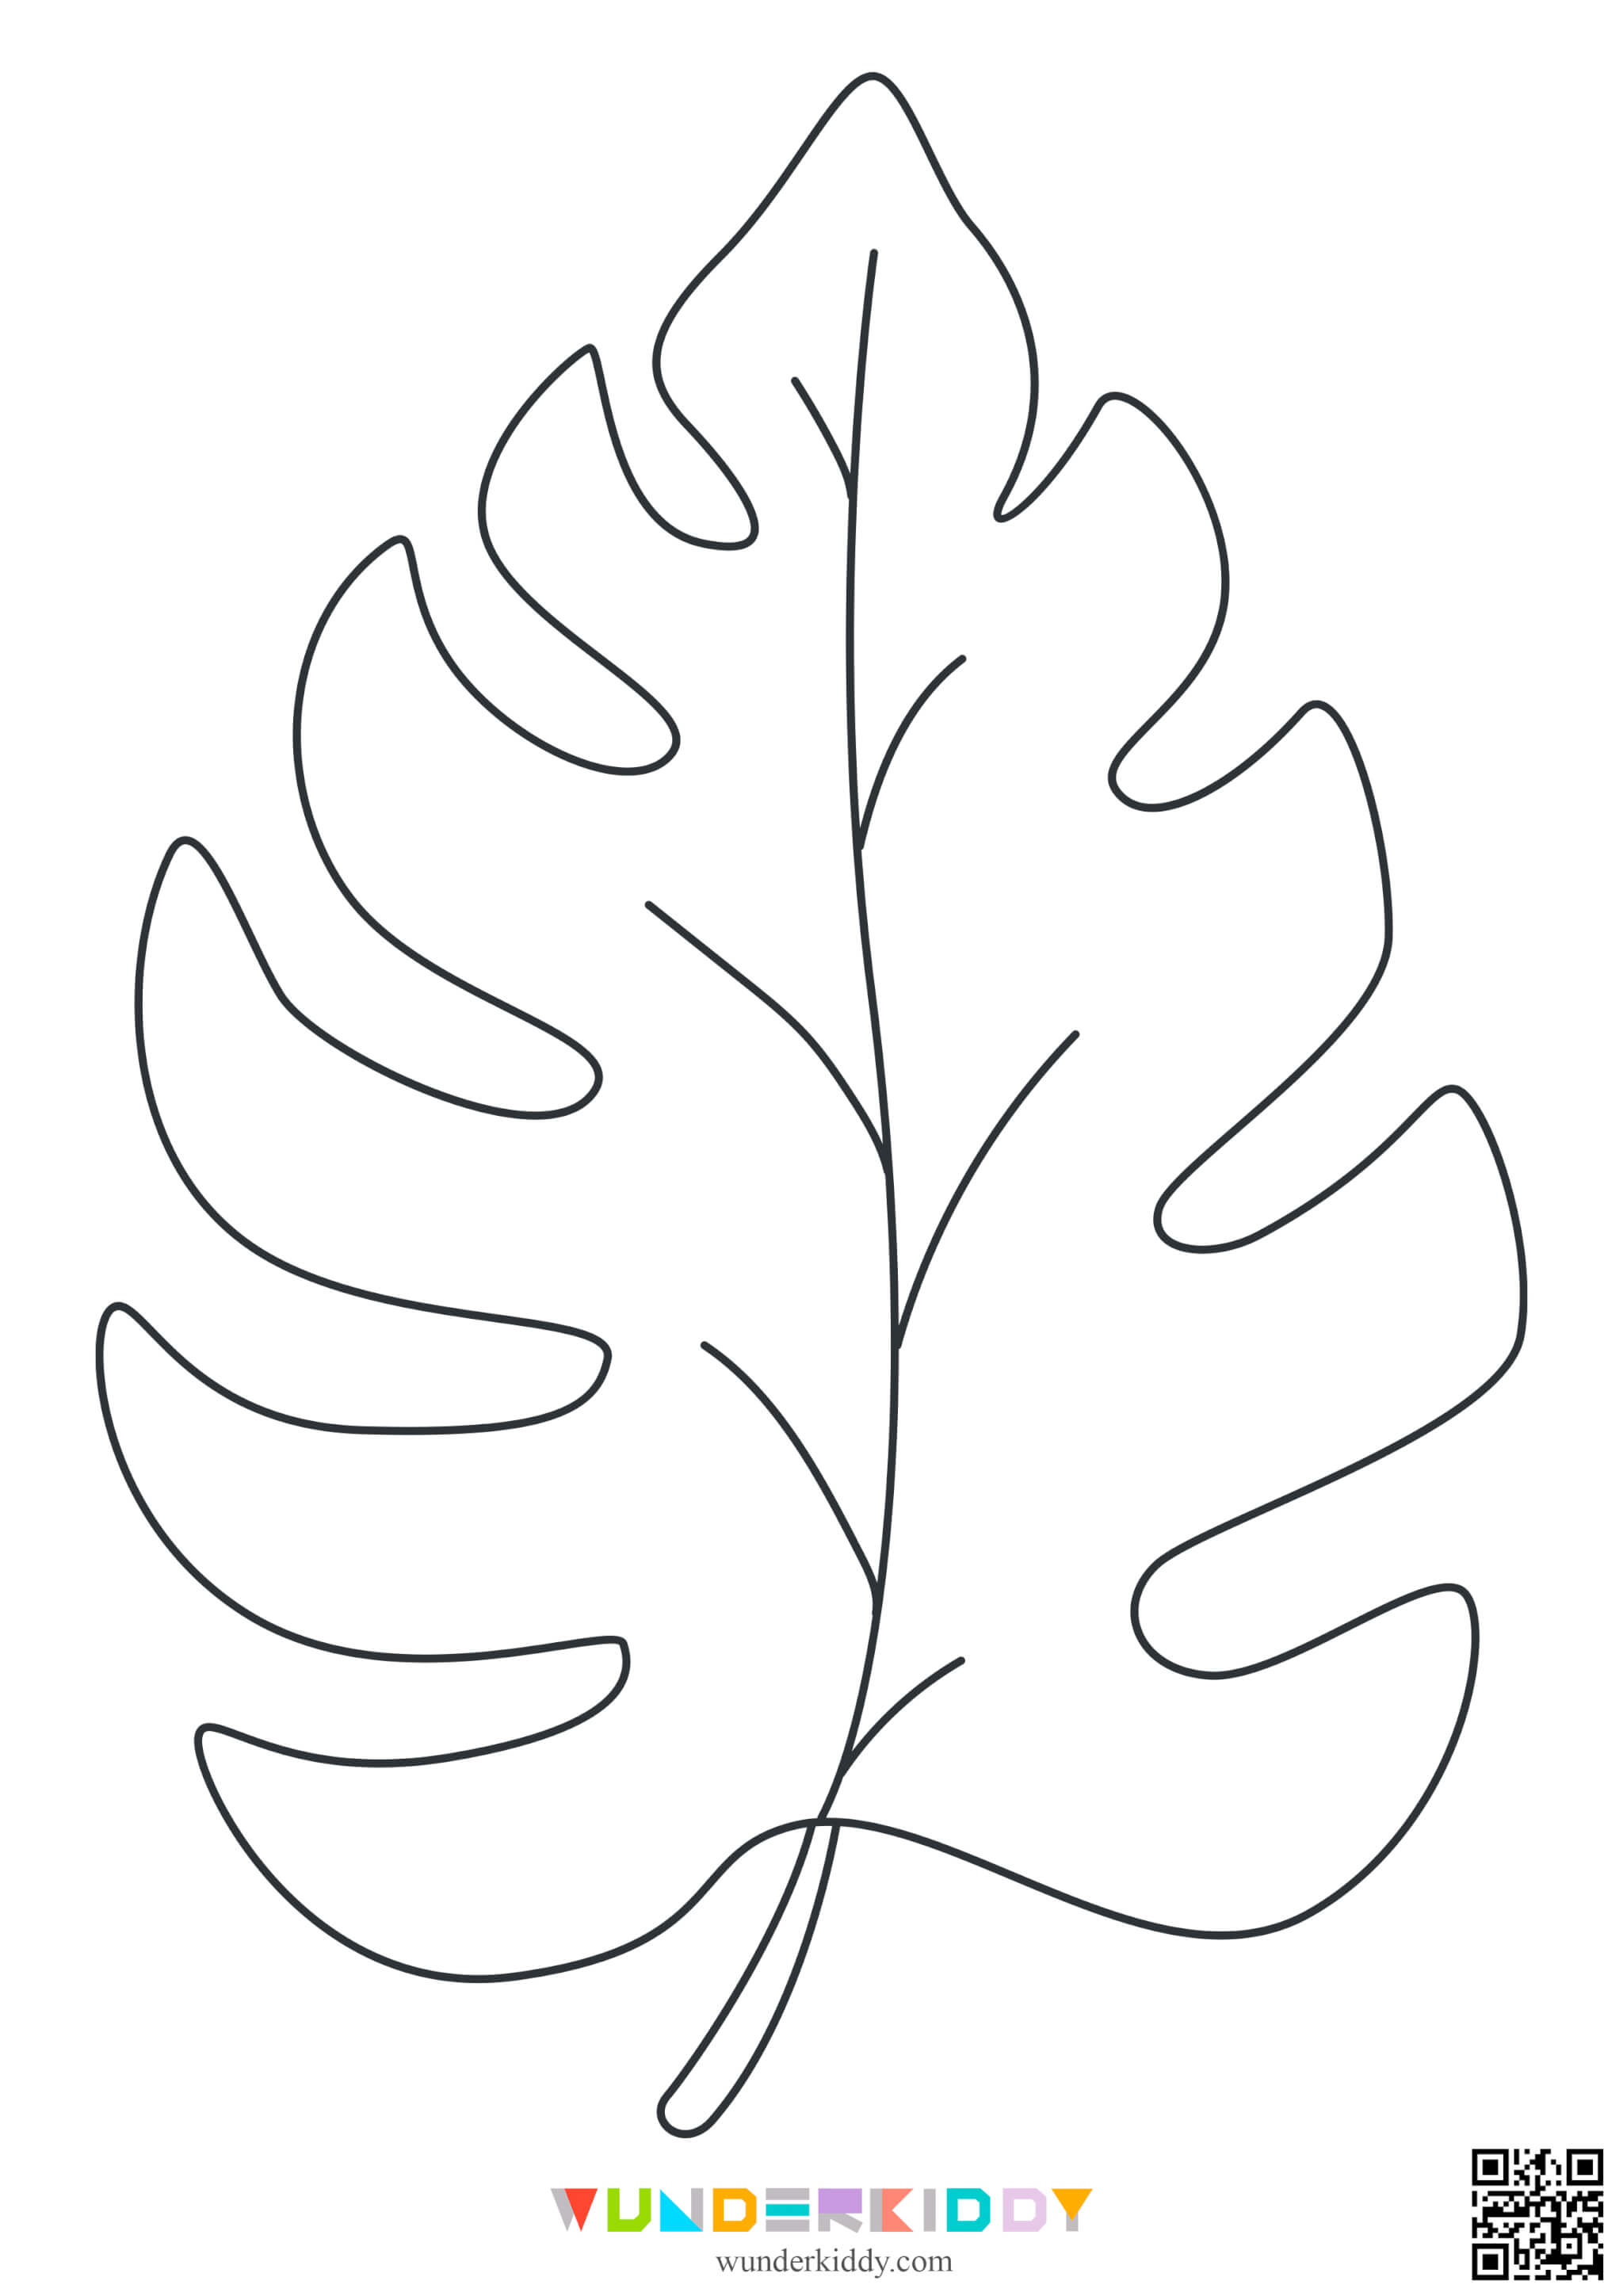 Fall Leaves Template - Image 2